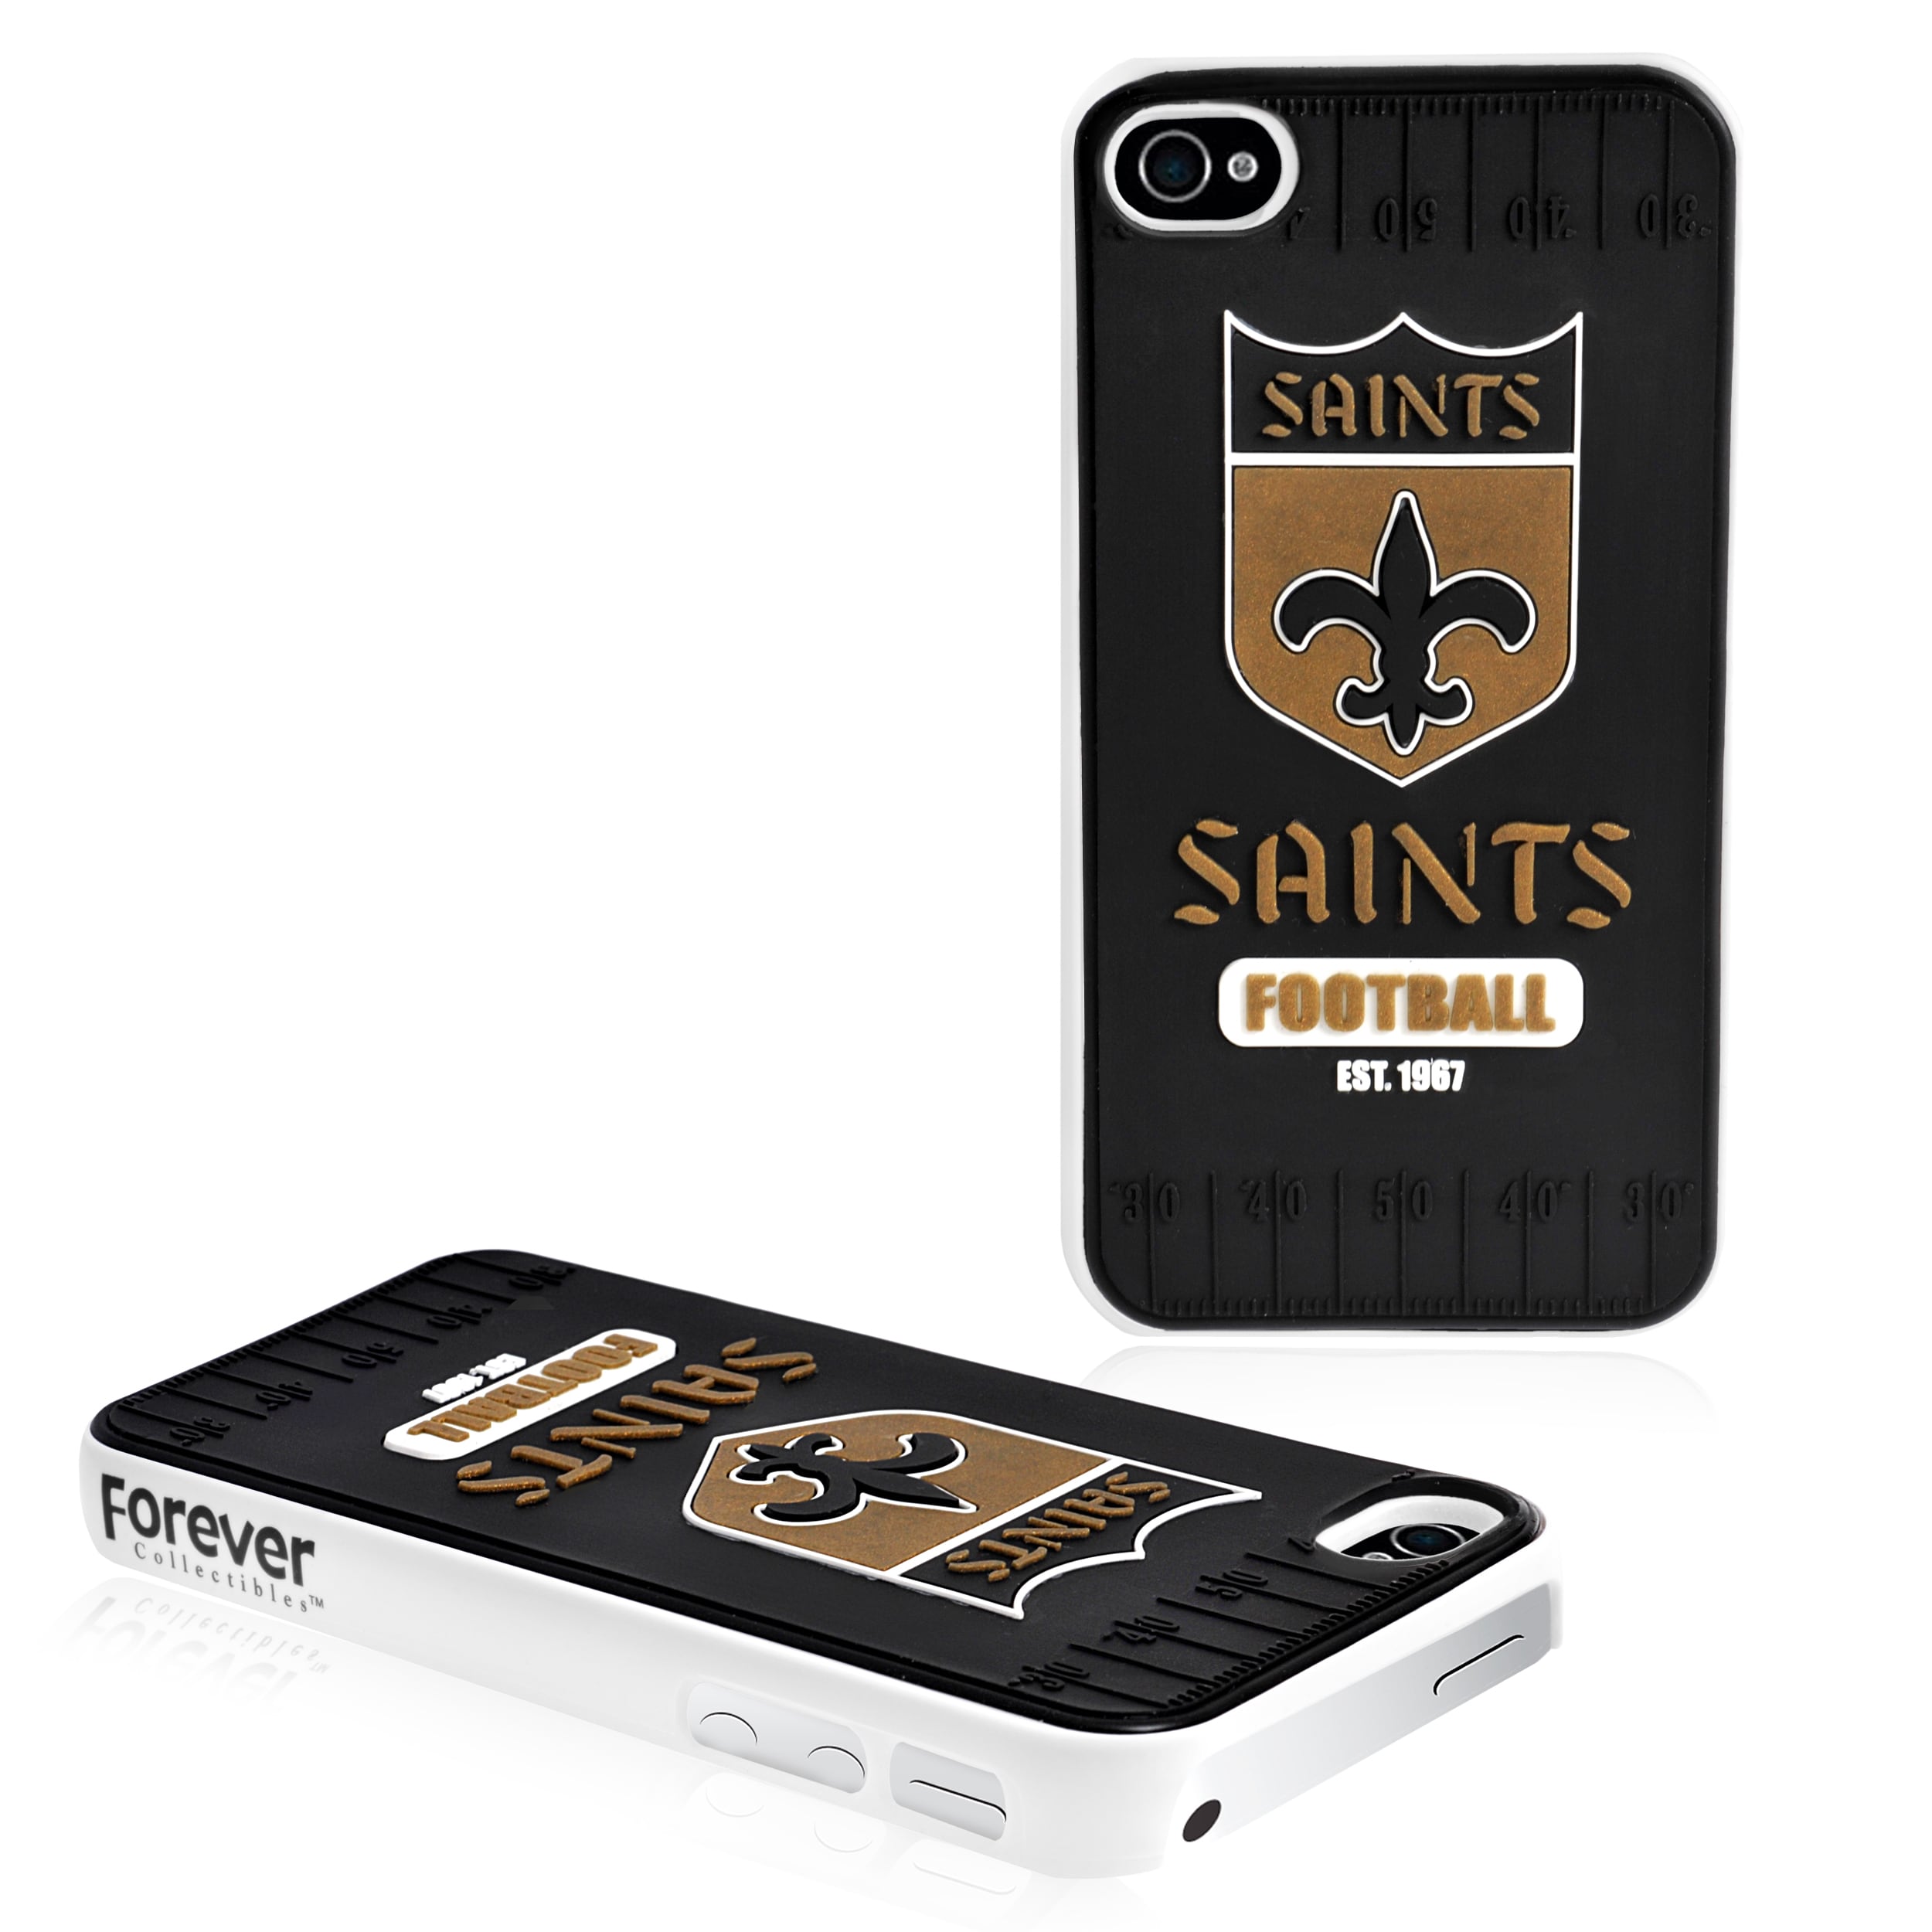 Forever Collectibles NFL New Orleans Saints iPhone 4/ 4S Hard